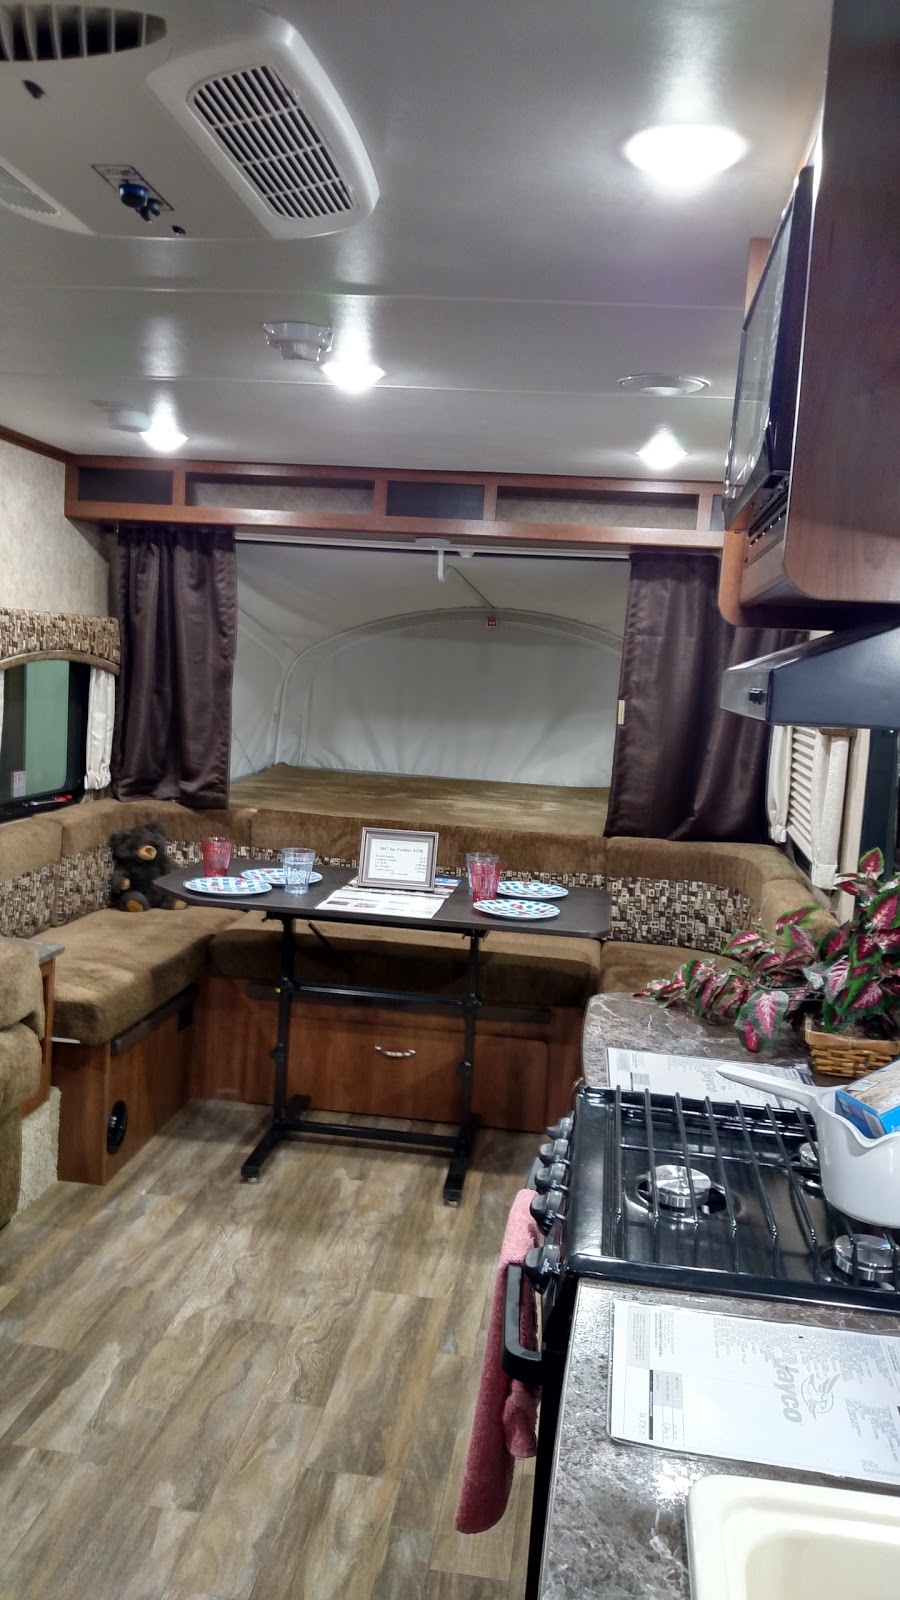 Kunes RV of Stoughton West | 1842 Co Hwy MM, Oregon, WI 53575 | Phone: (608) 835-3002